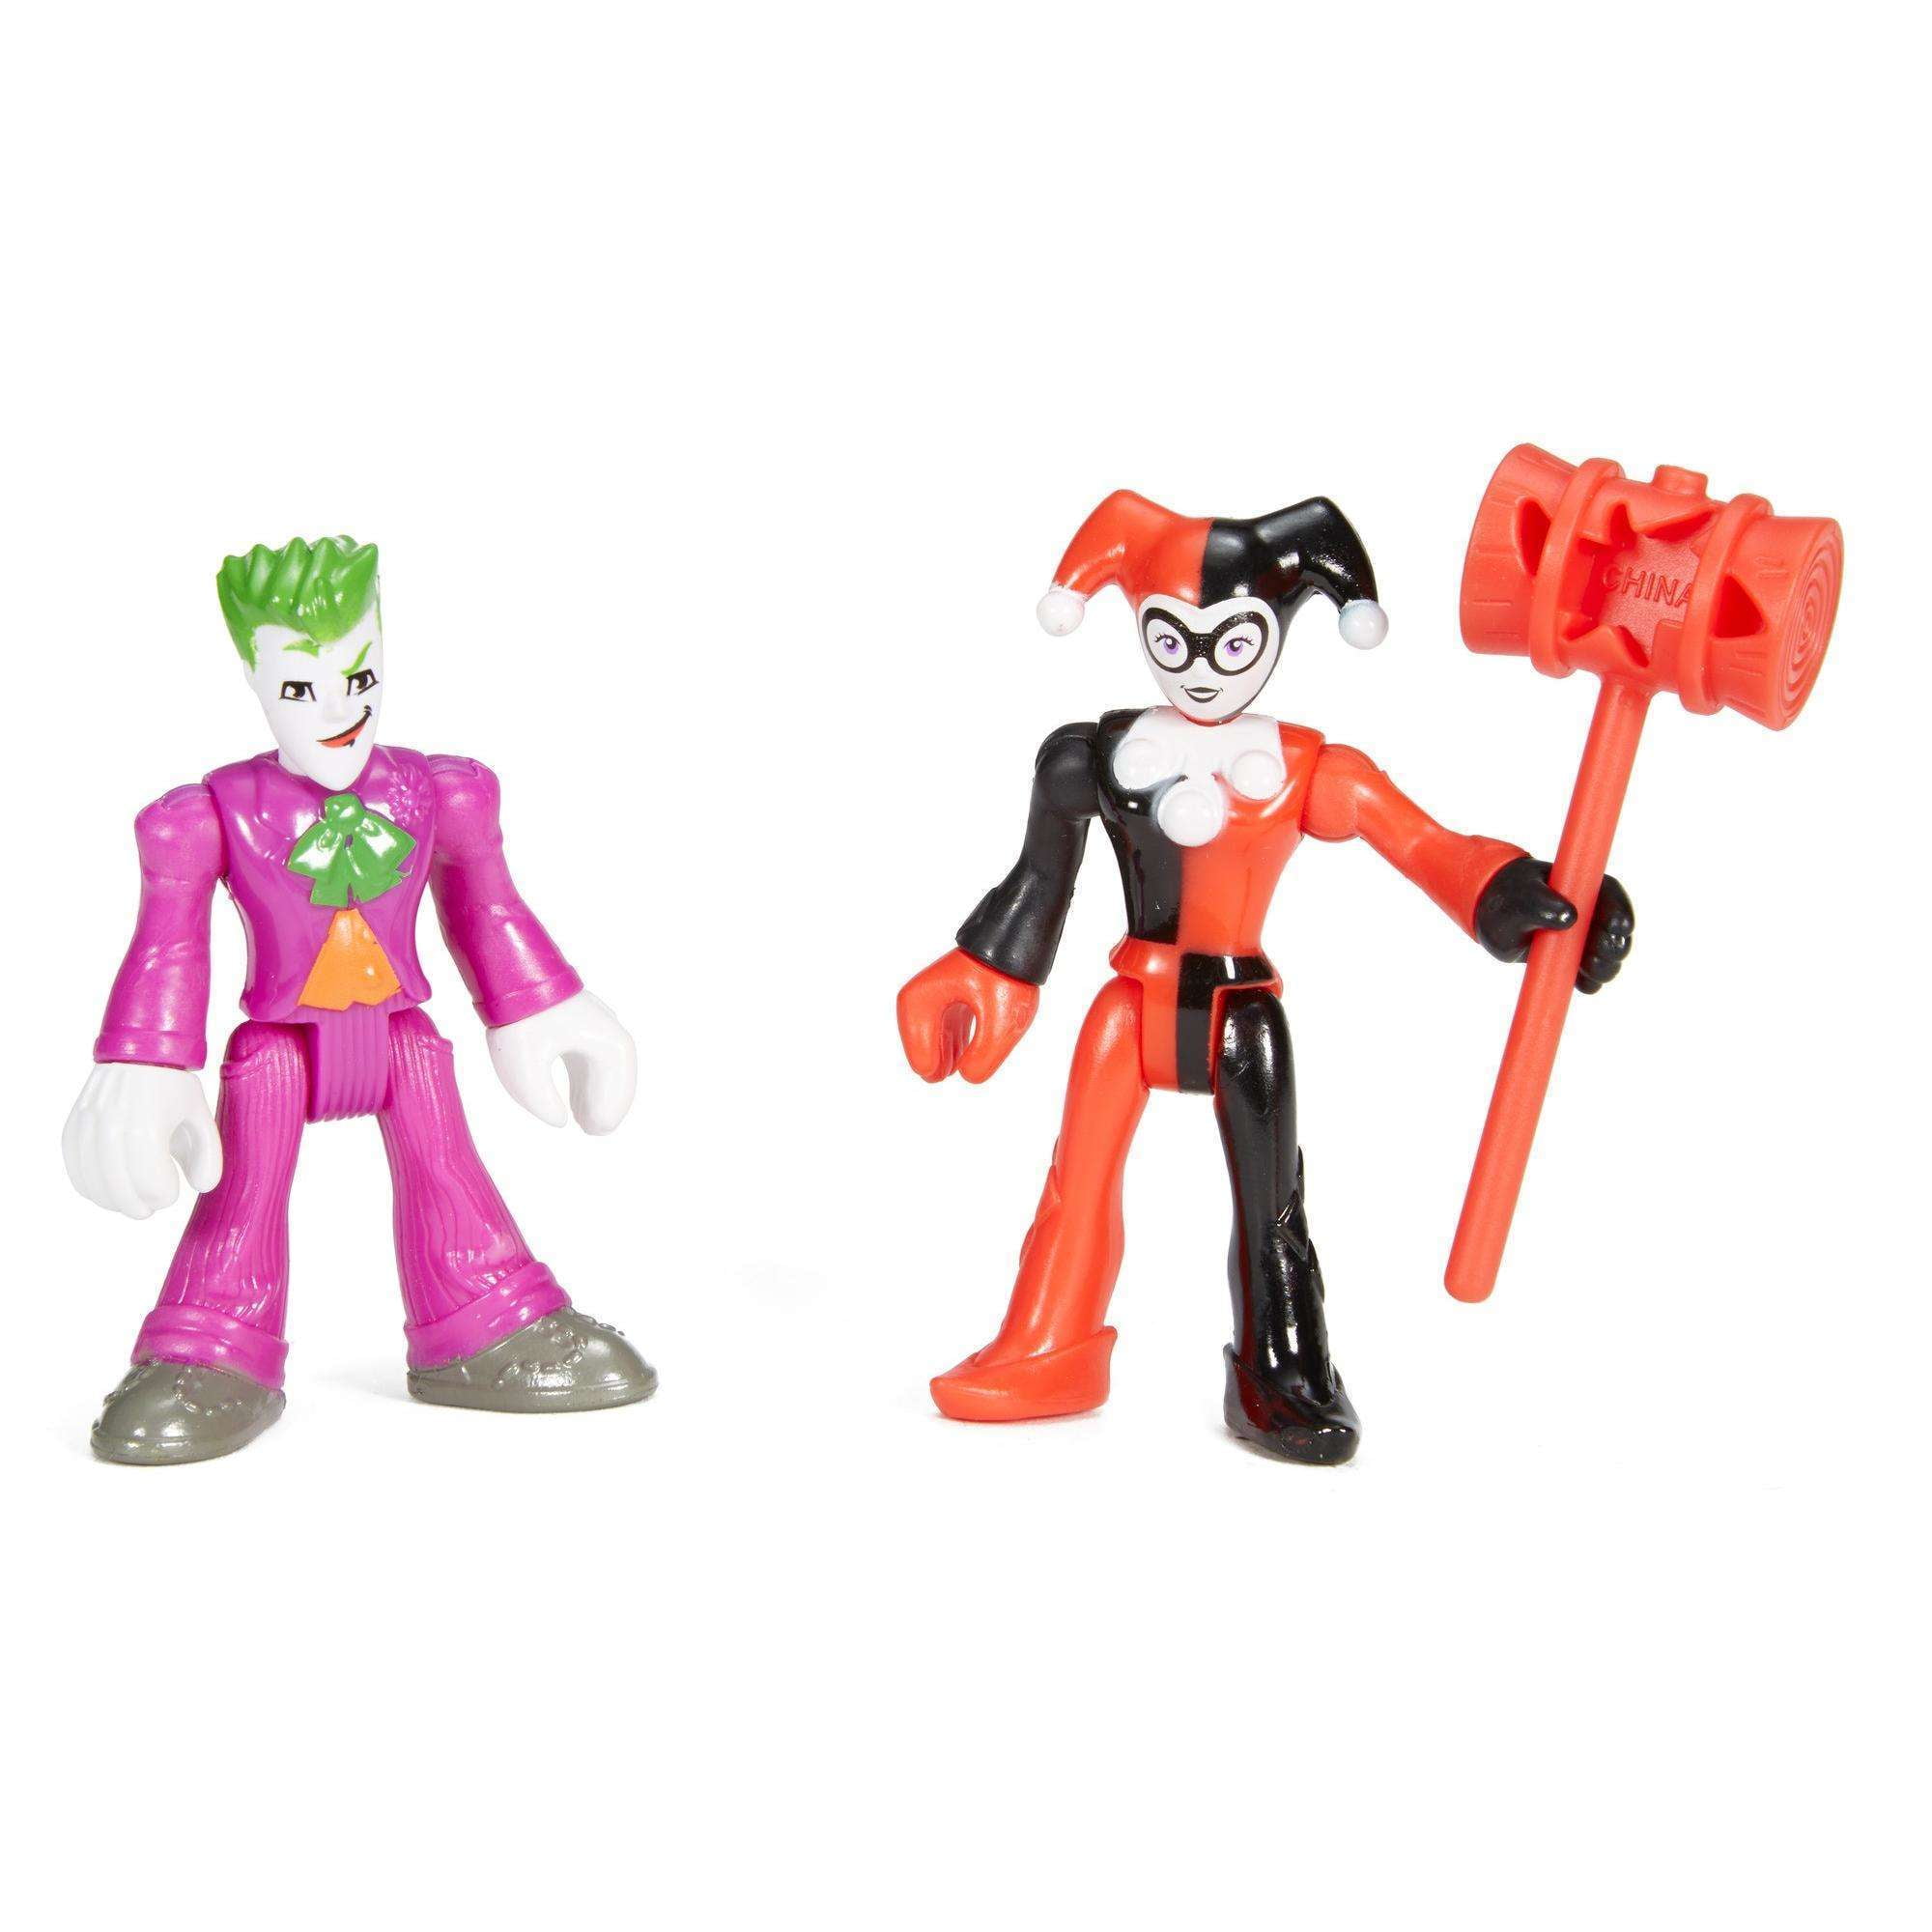 Imaginext DC Super Friends the Joker and Harley Quinn Action Figures